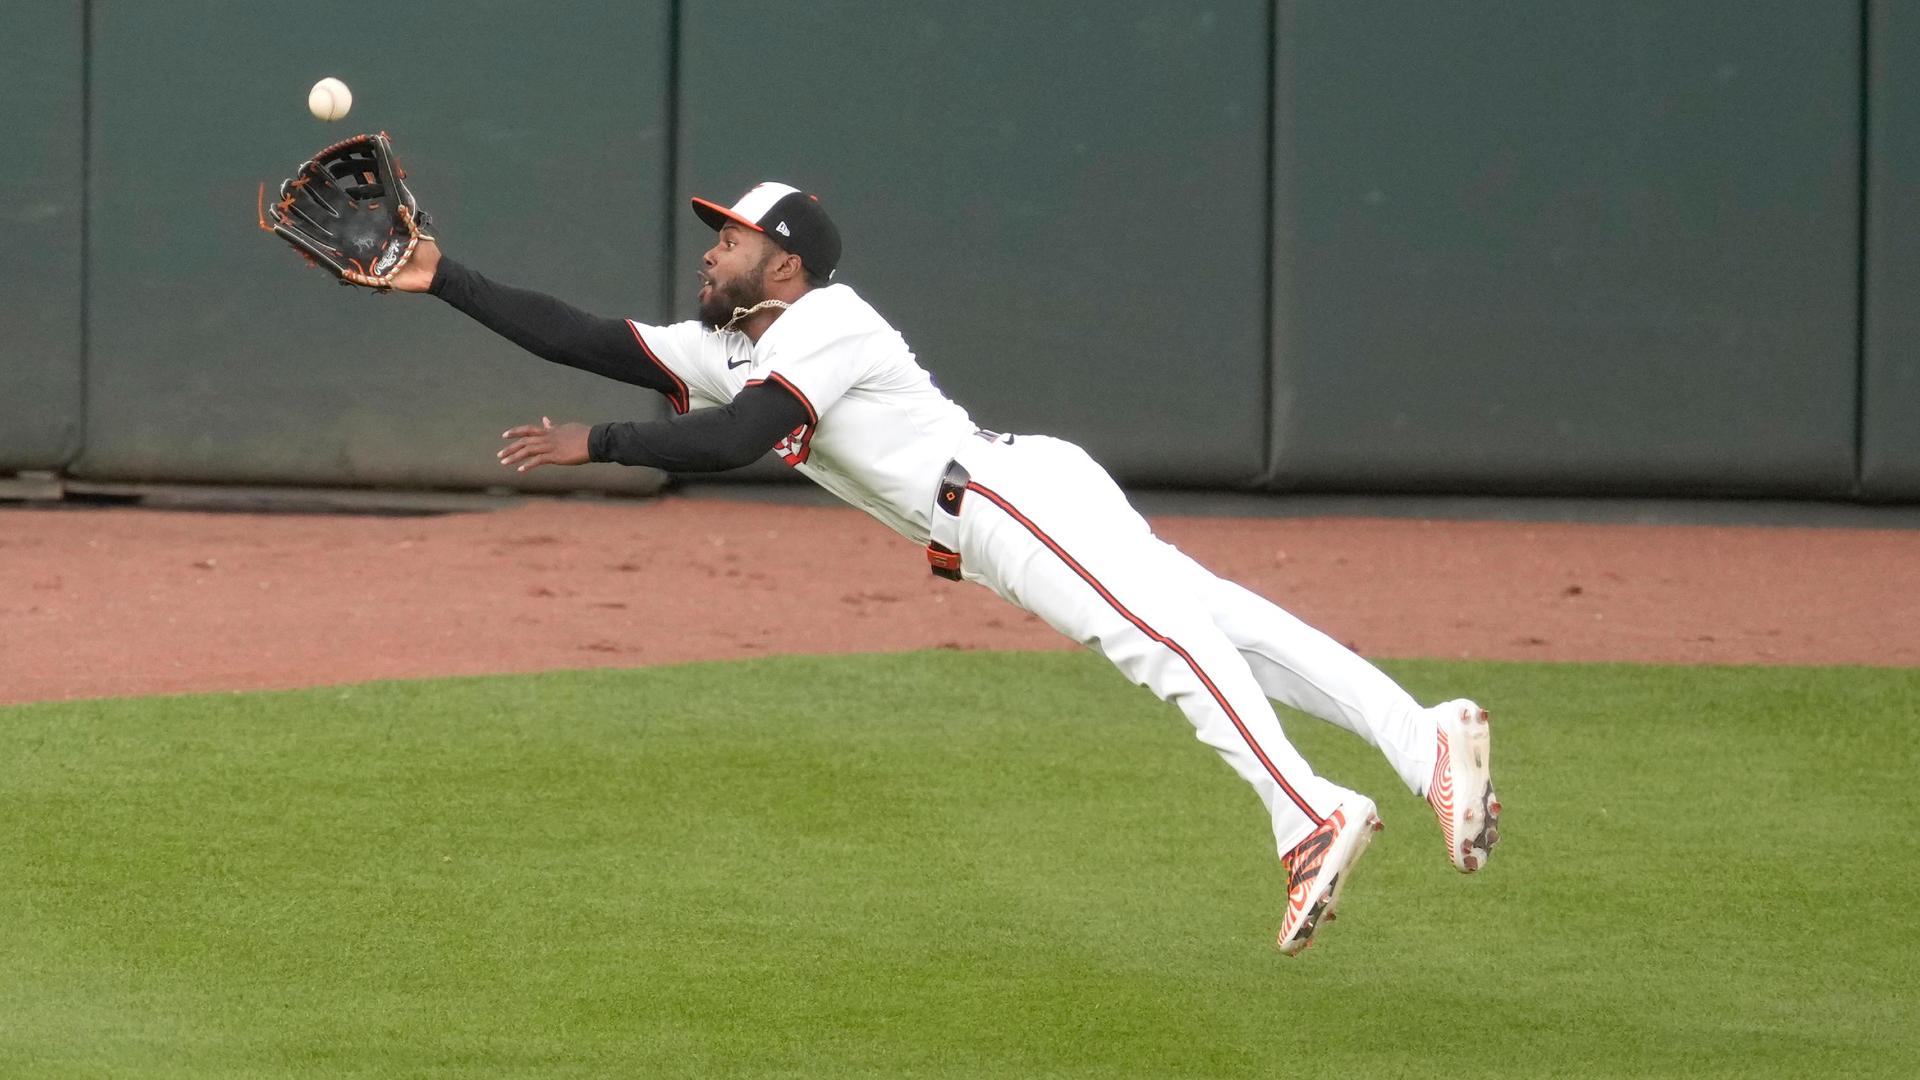 Cedric Mullins shines with his glove and bat as the Orioles down the Twins 7-4